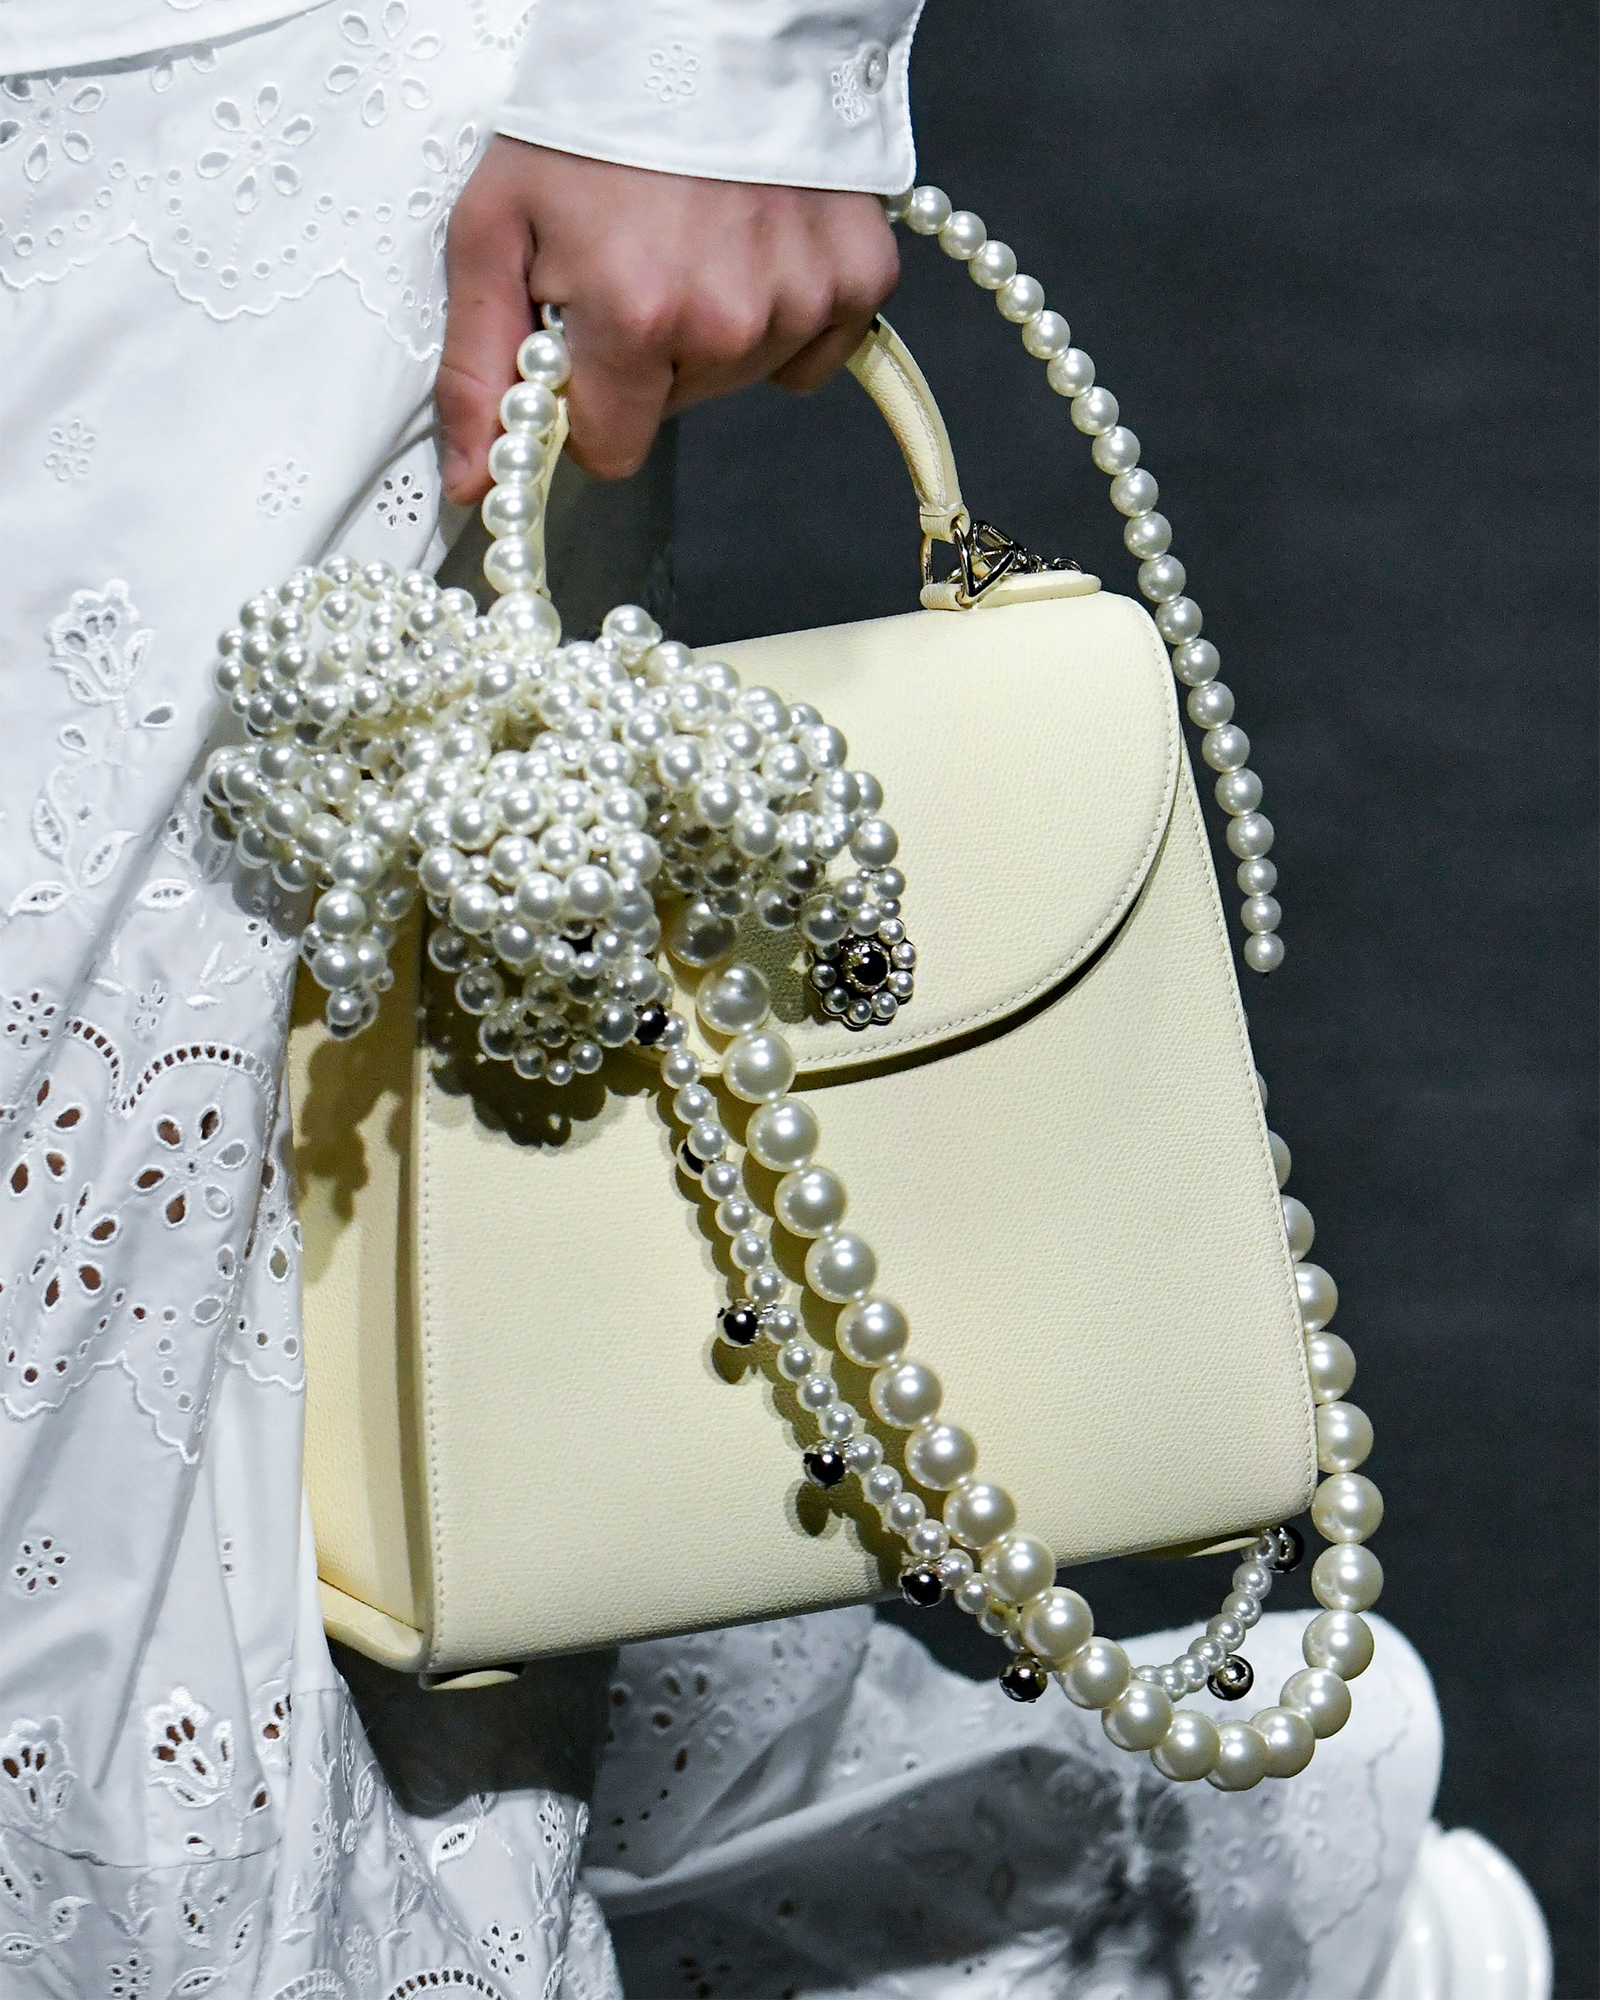 Lime hand bag with pearl details by Simone Rocha.